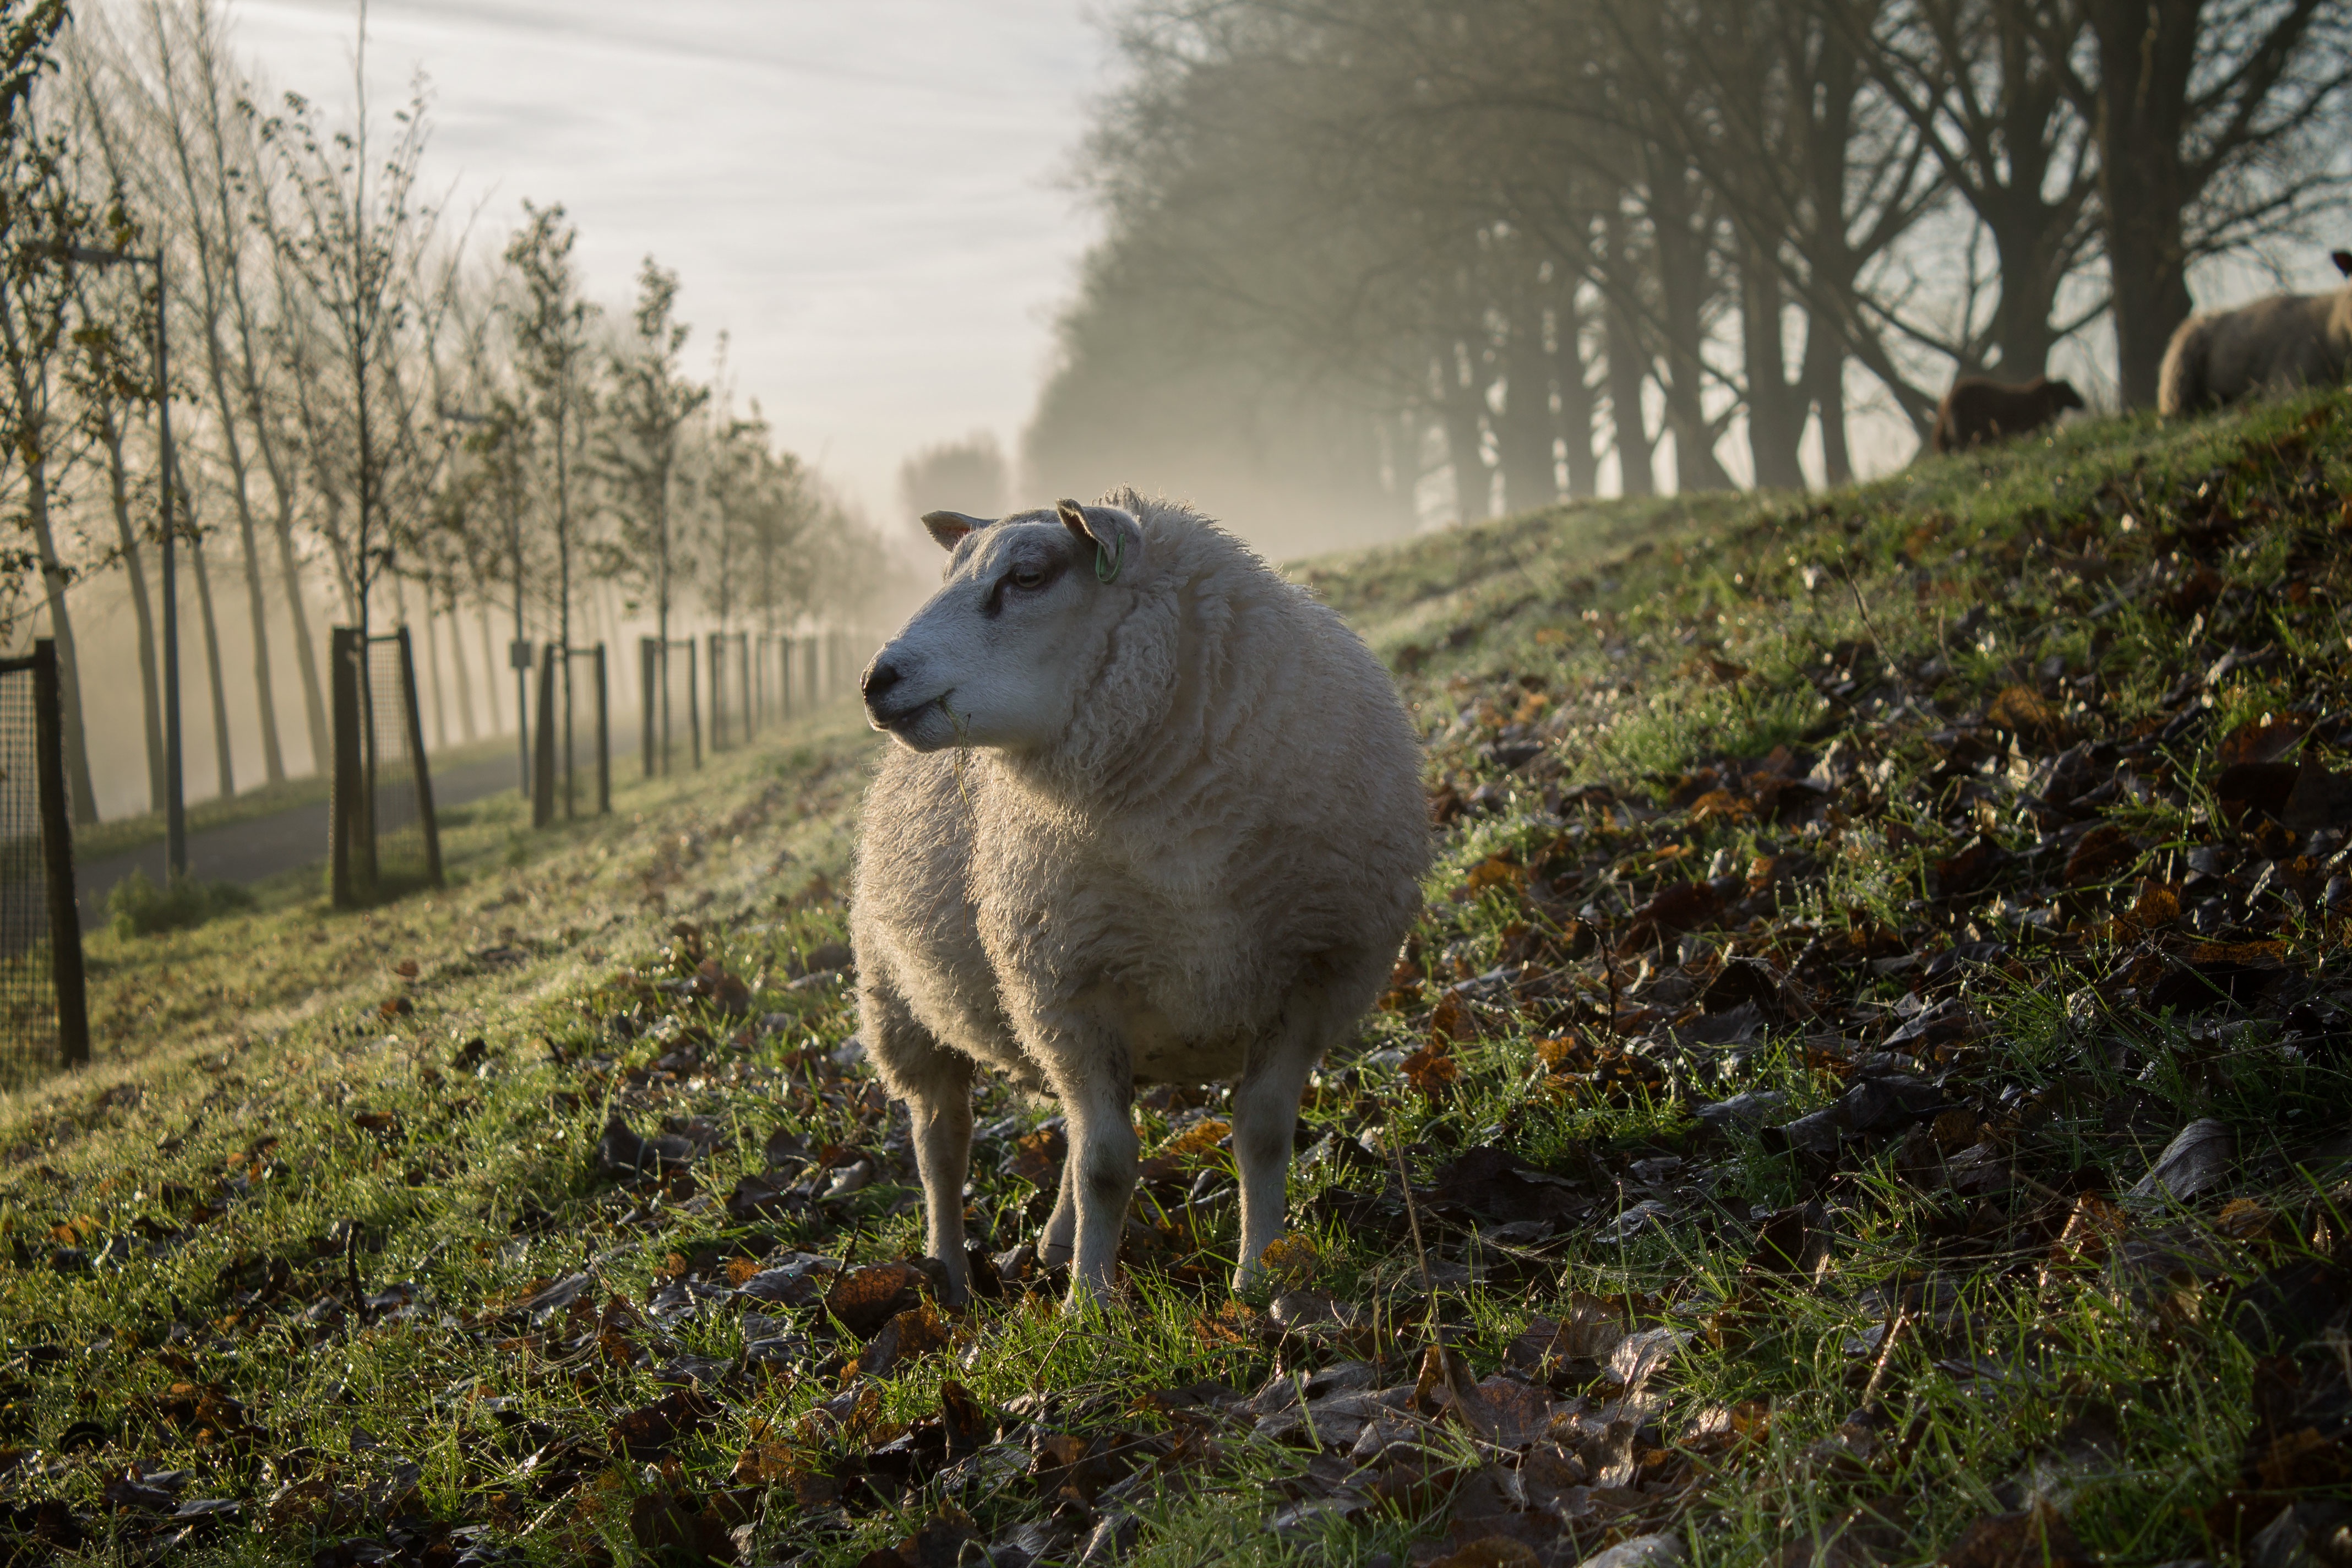 A white sheep in a meadow with fallen leaves